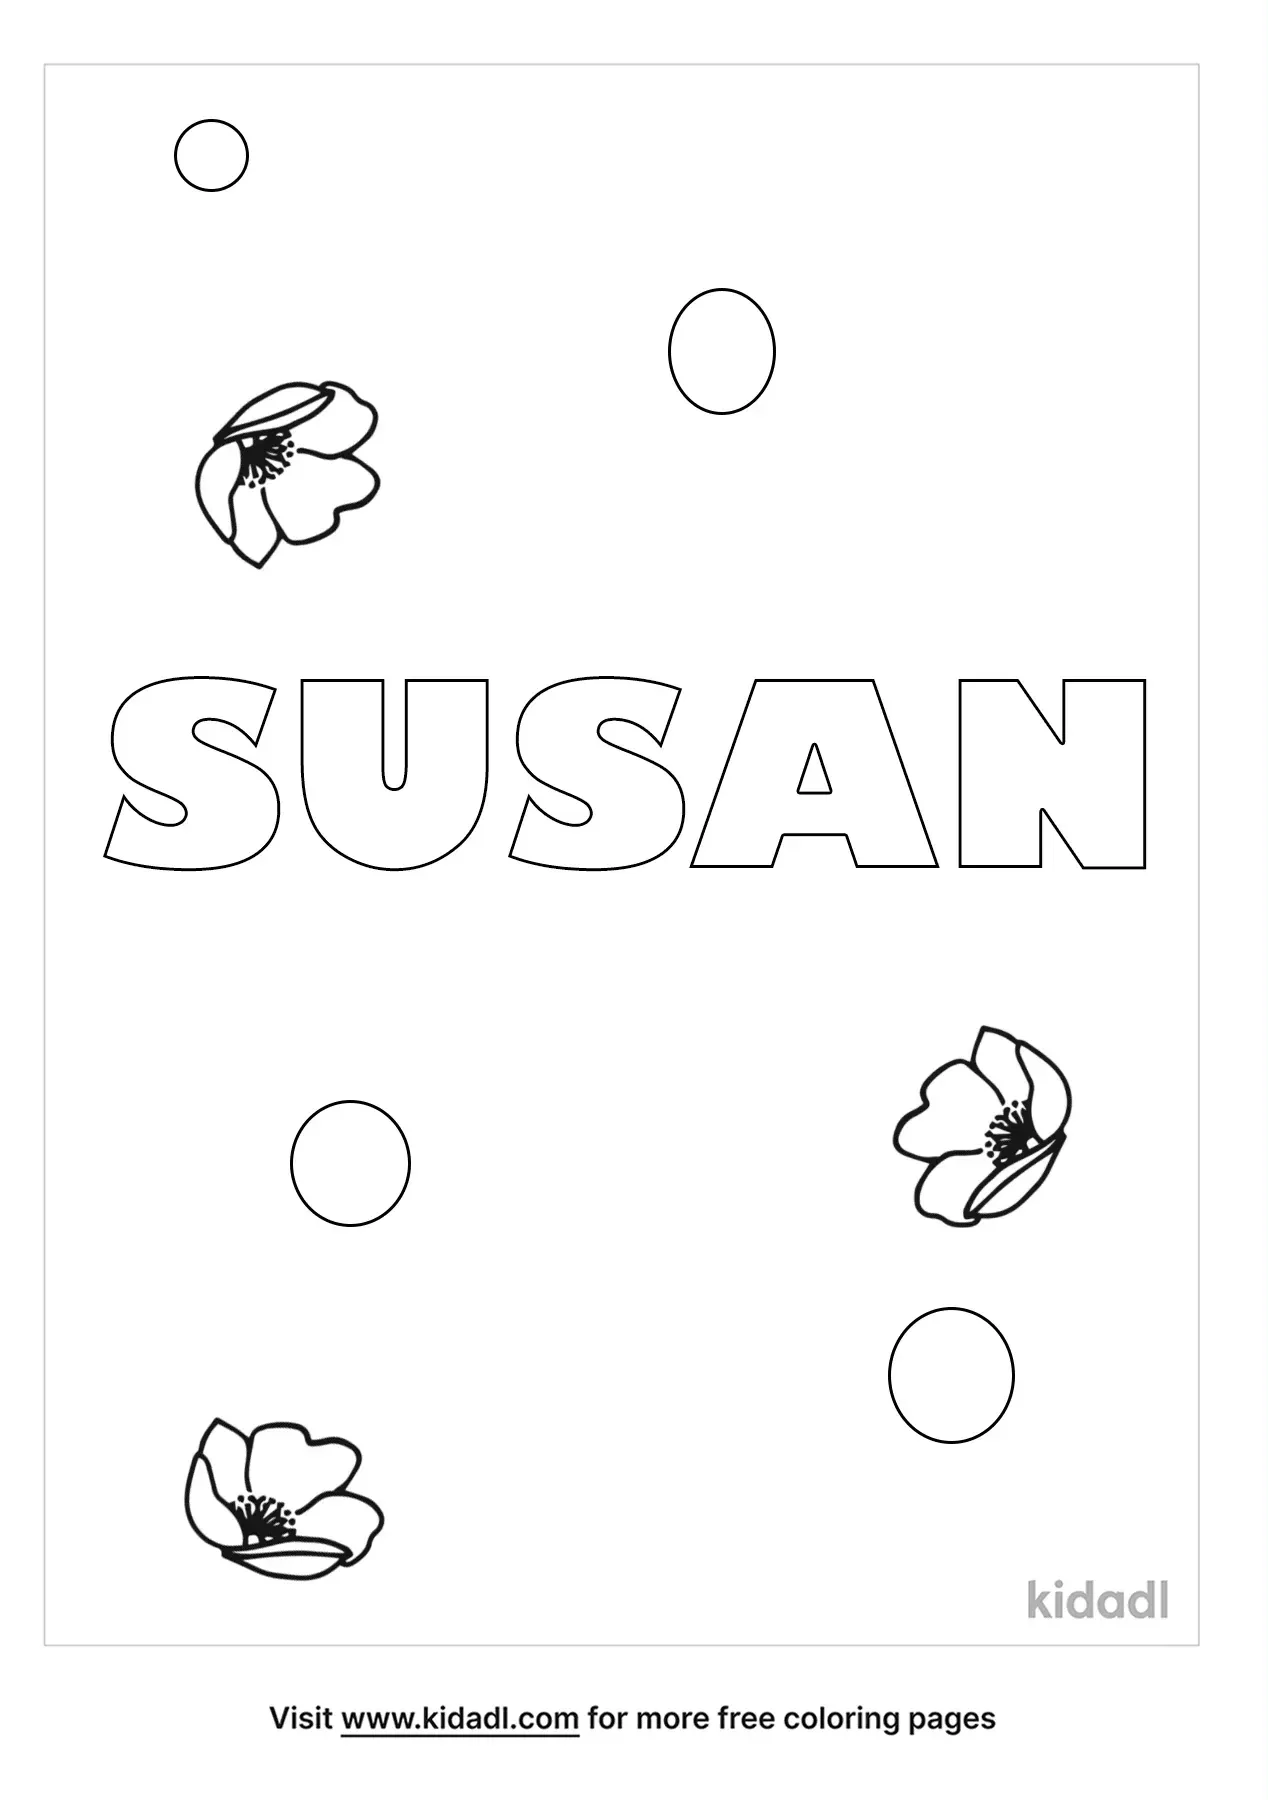 Free Name Stacy Coloring Page | Coloring Page Printables | Kidadl